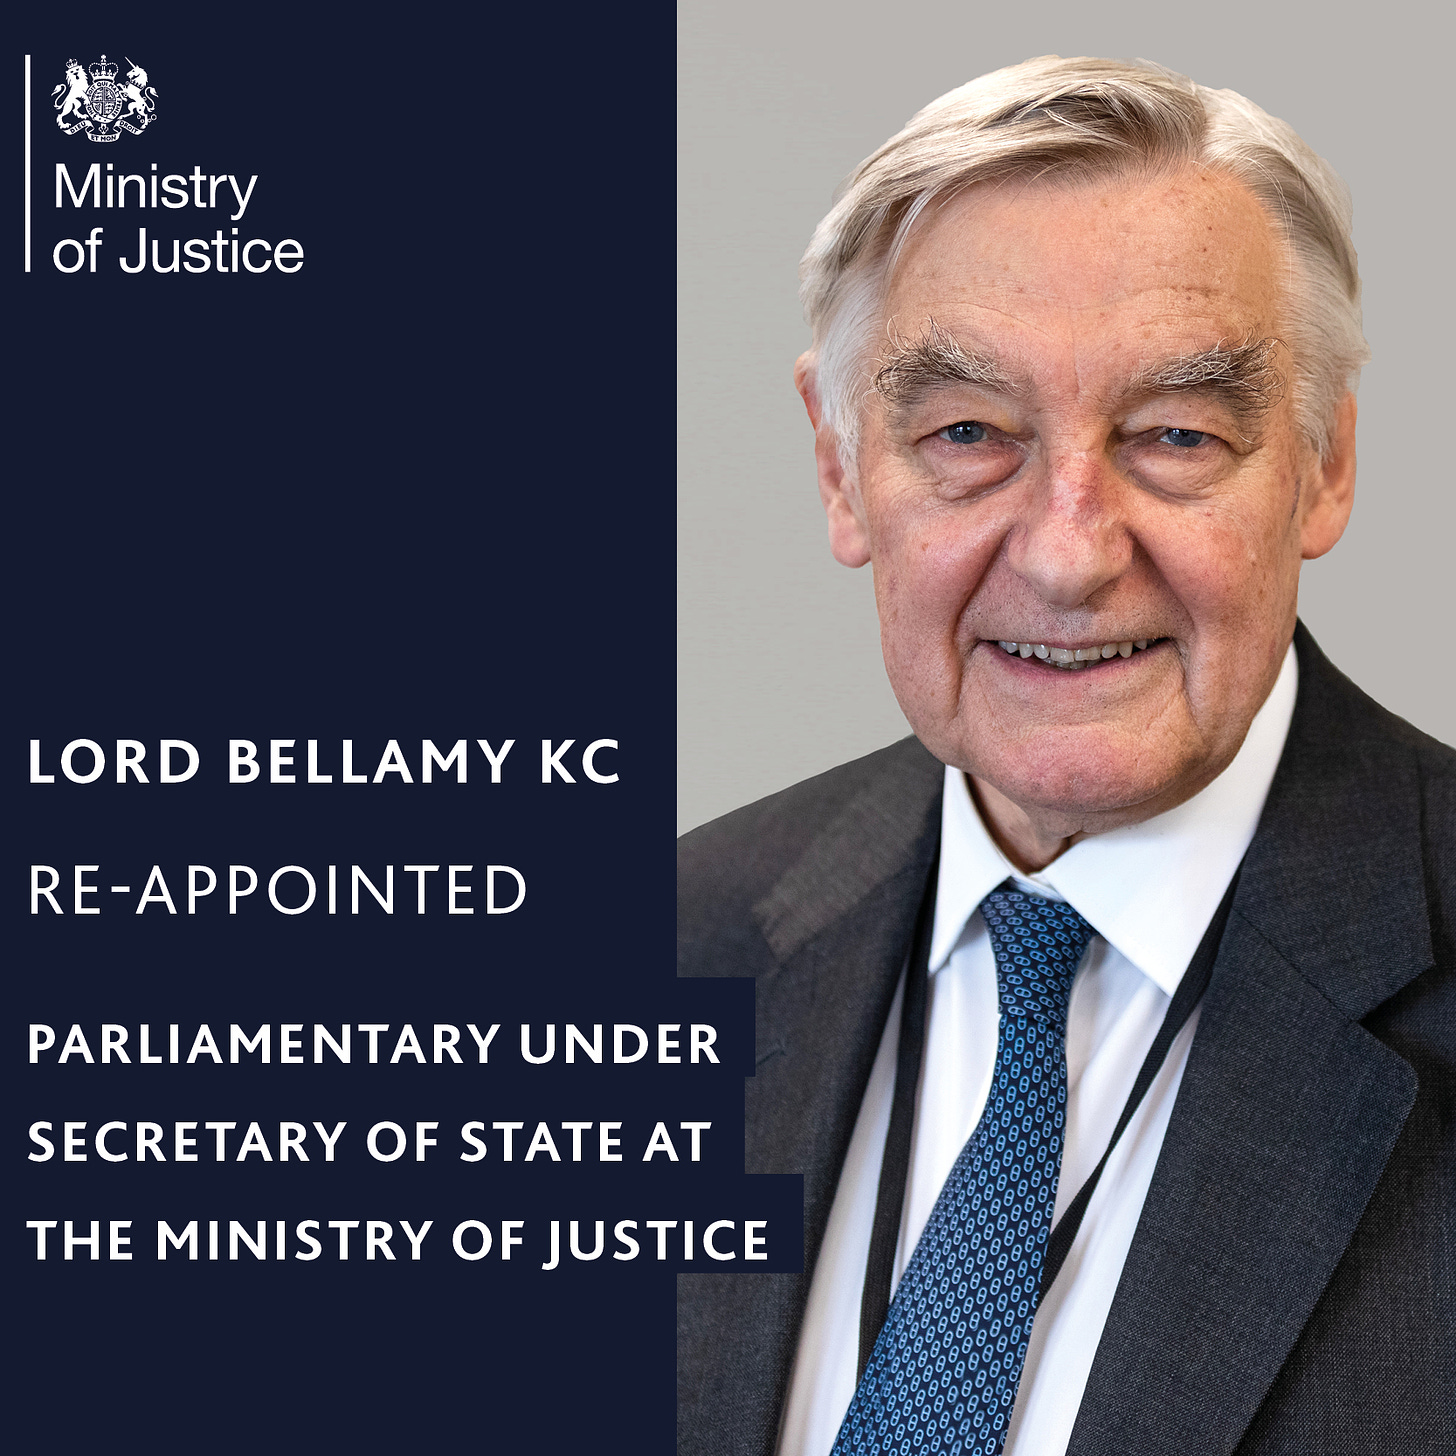 Ministry of Justice on X: ".@MoJGovUK and @DominicRaab welcome back Lord  Bellamy KC who has been re-appointed Parliamentary Under Secretary of  State. Find out more about the MoJ here: https://t.co/mPUsAHDWeI  https://t.co/xjbOzV7k2m" /